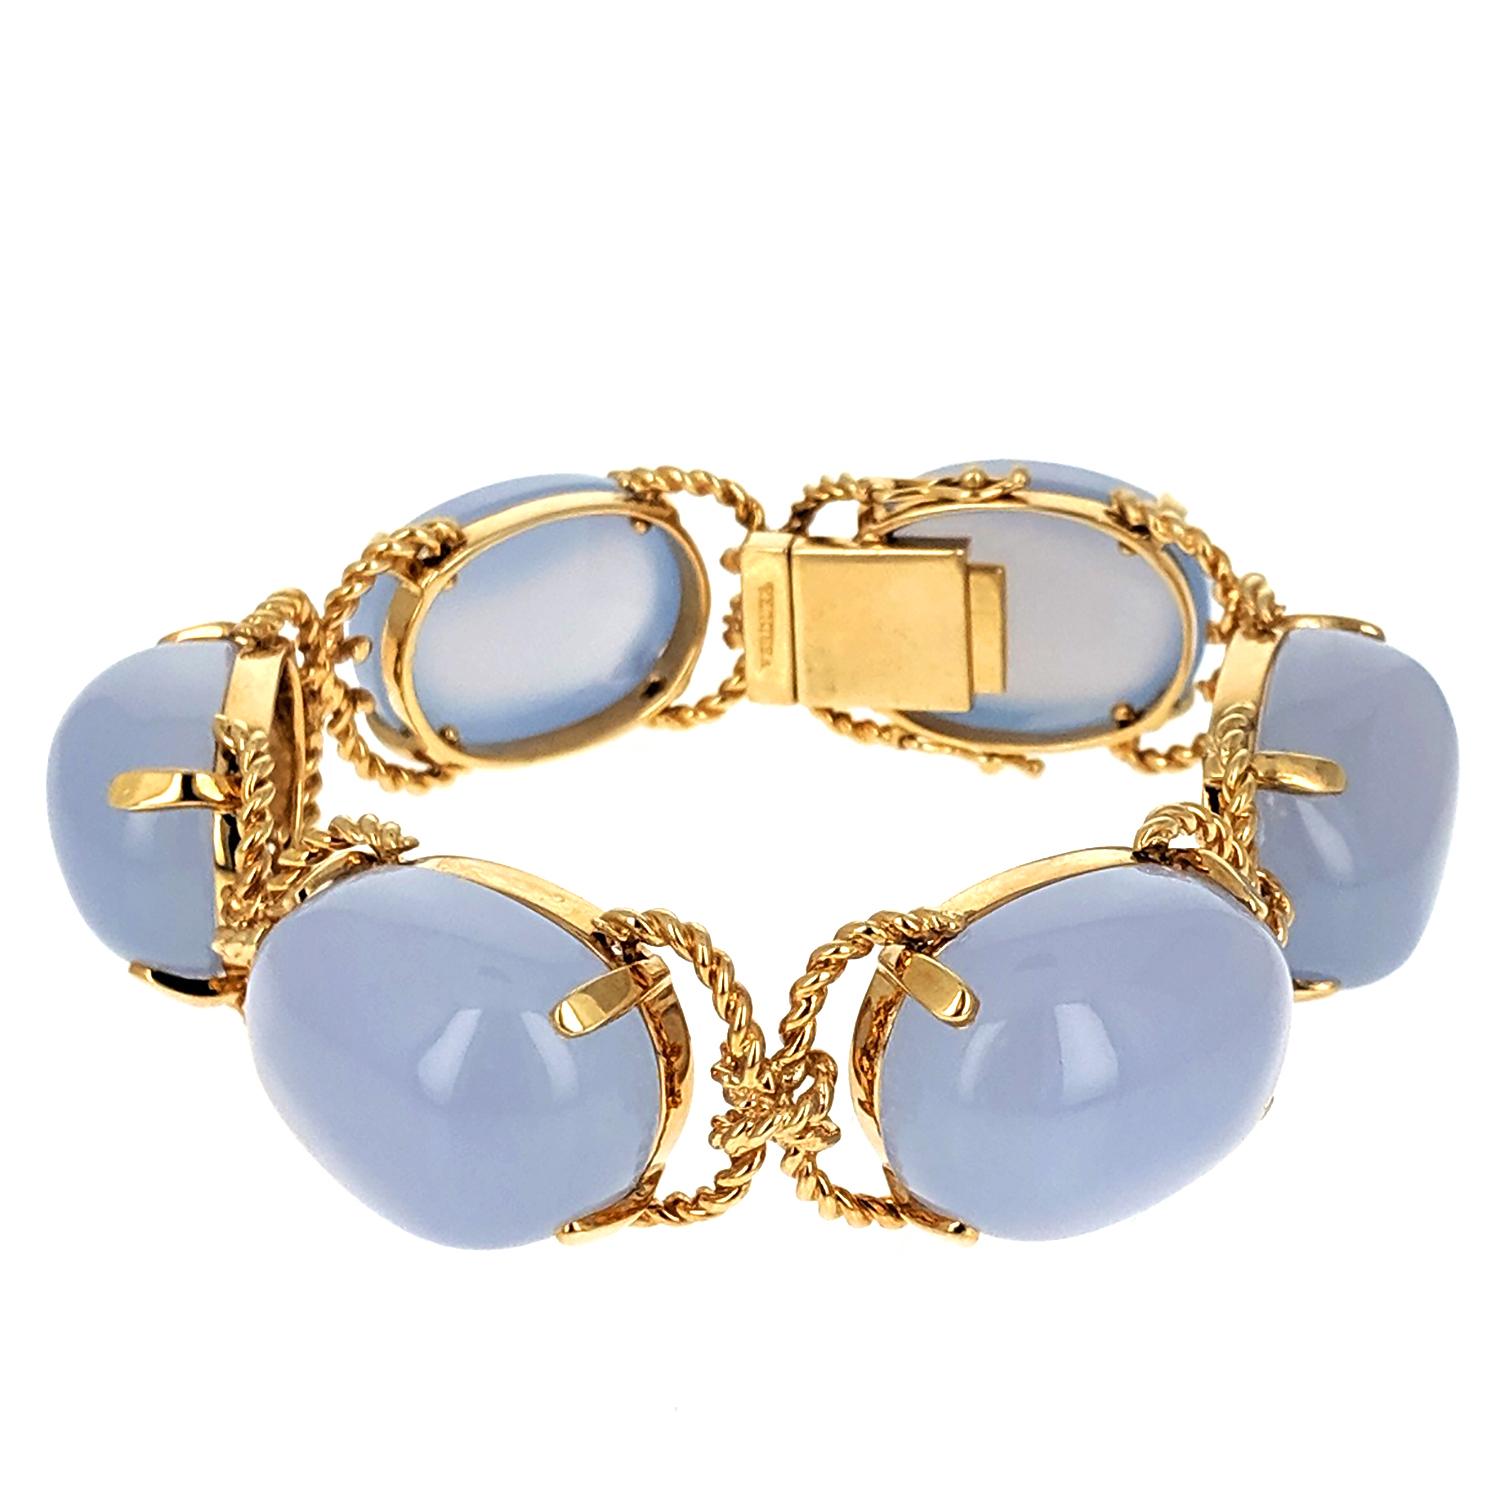 With six large polished chalcedony 'pebbles' mounted on 18k yellow gold in a rope motif. Signed Verdura. Retails for $18,500.